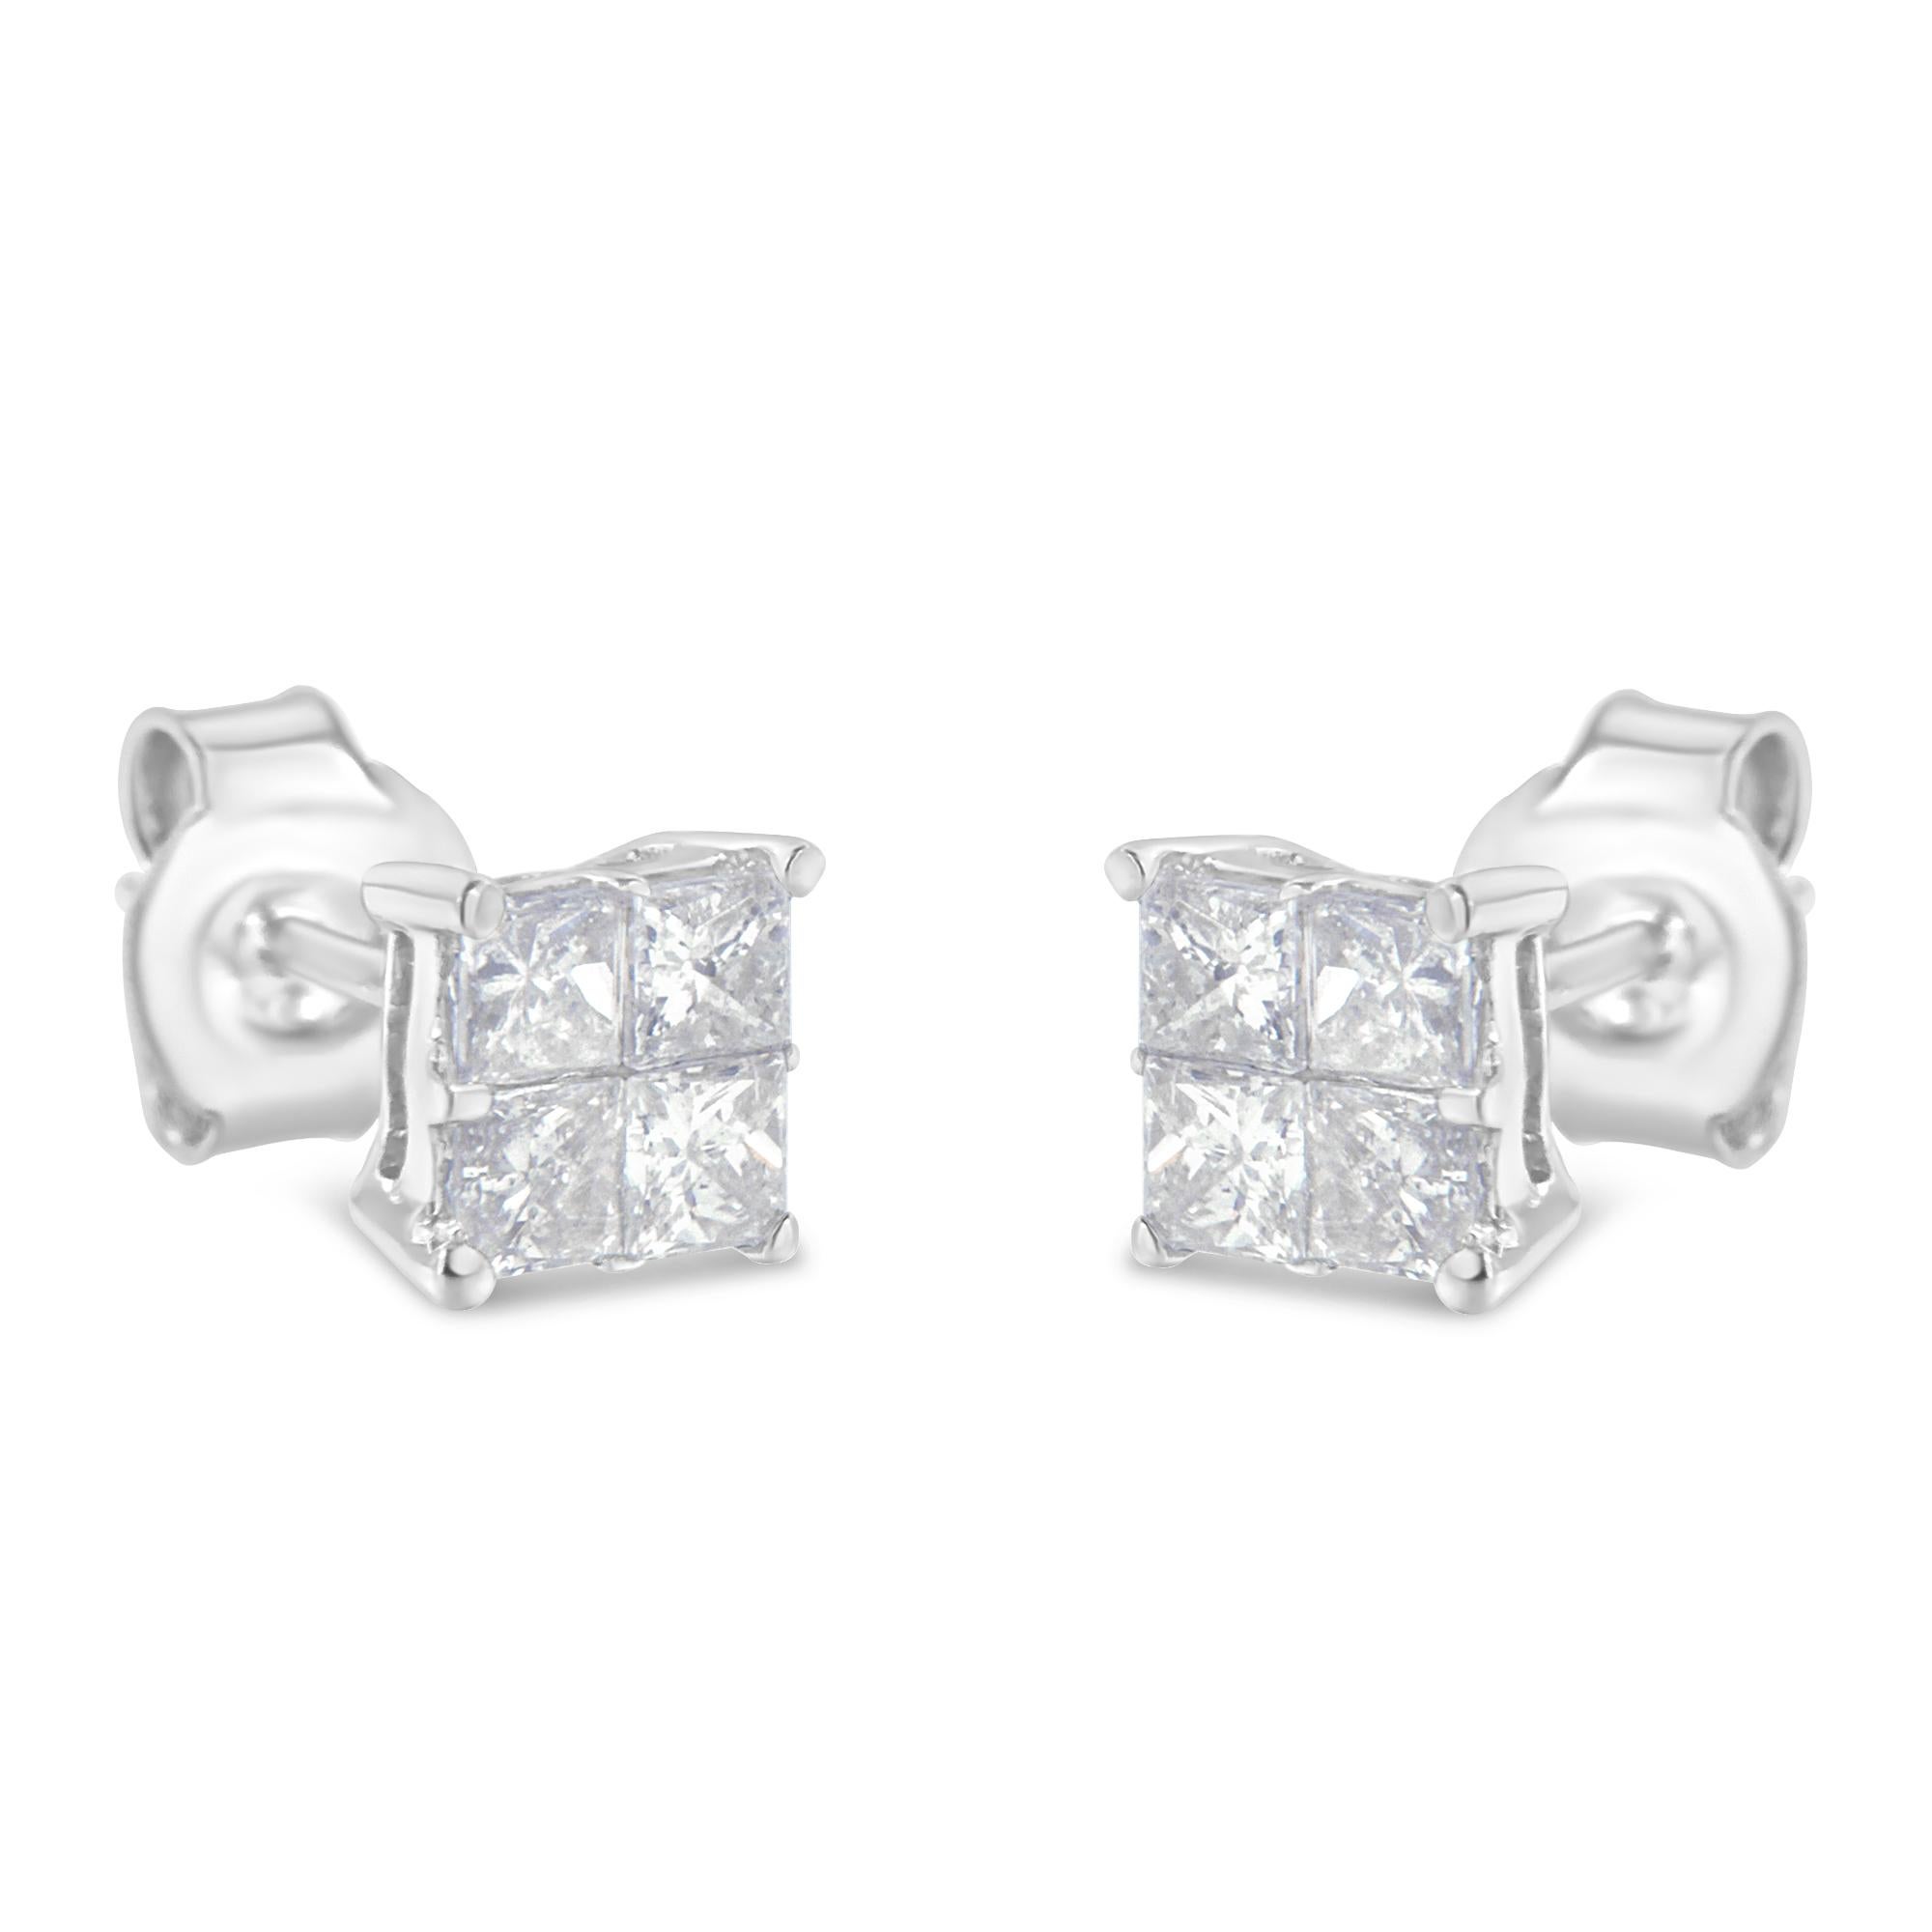 how much are 3 carat diamond earrings